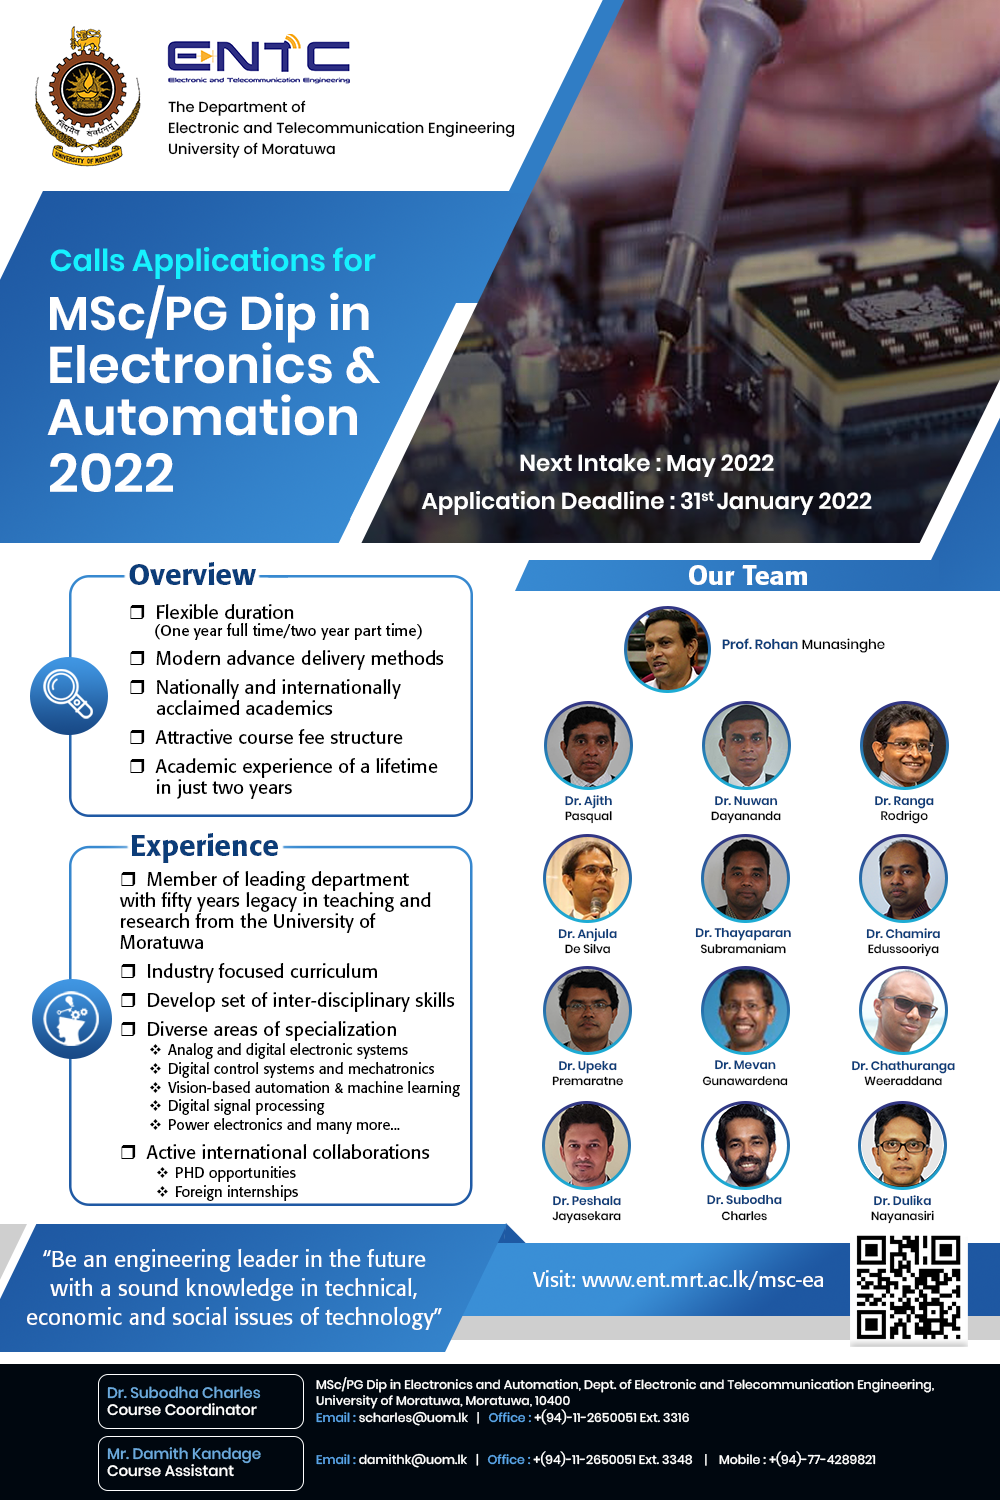 MSc/PG Dip in Electronics and Automation 2022